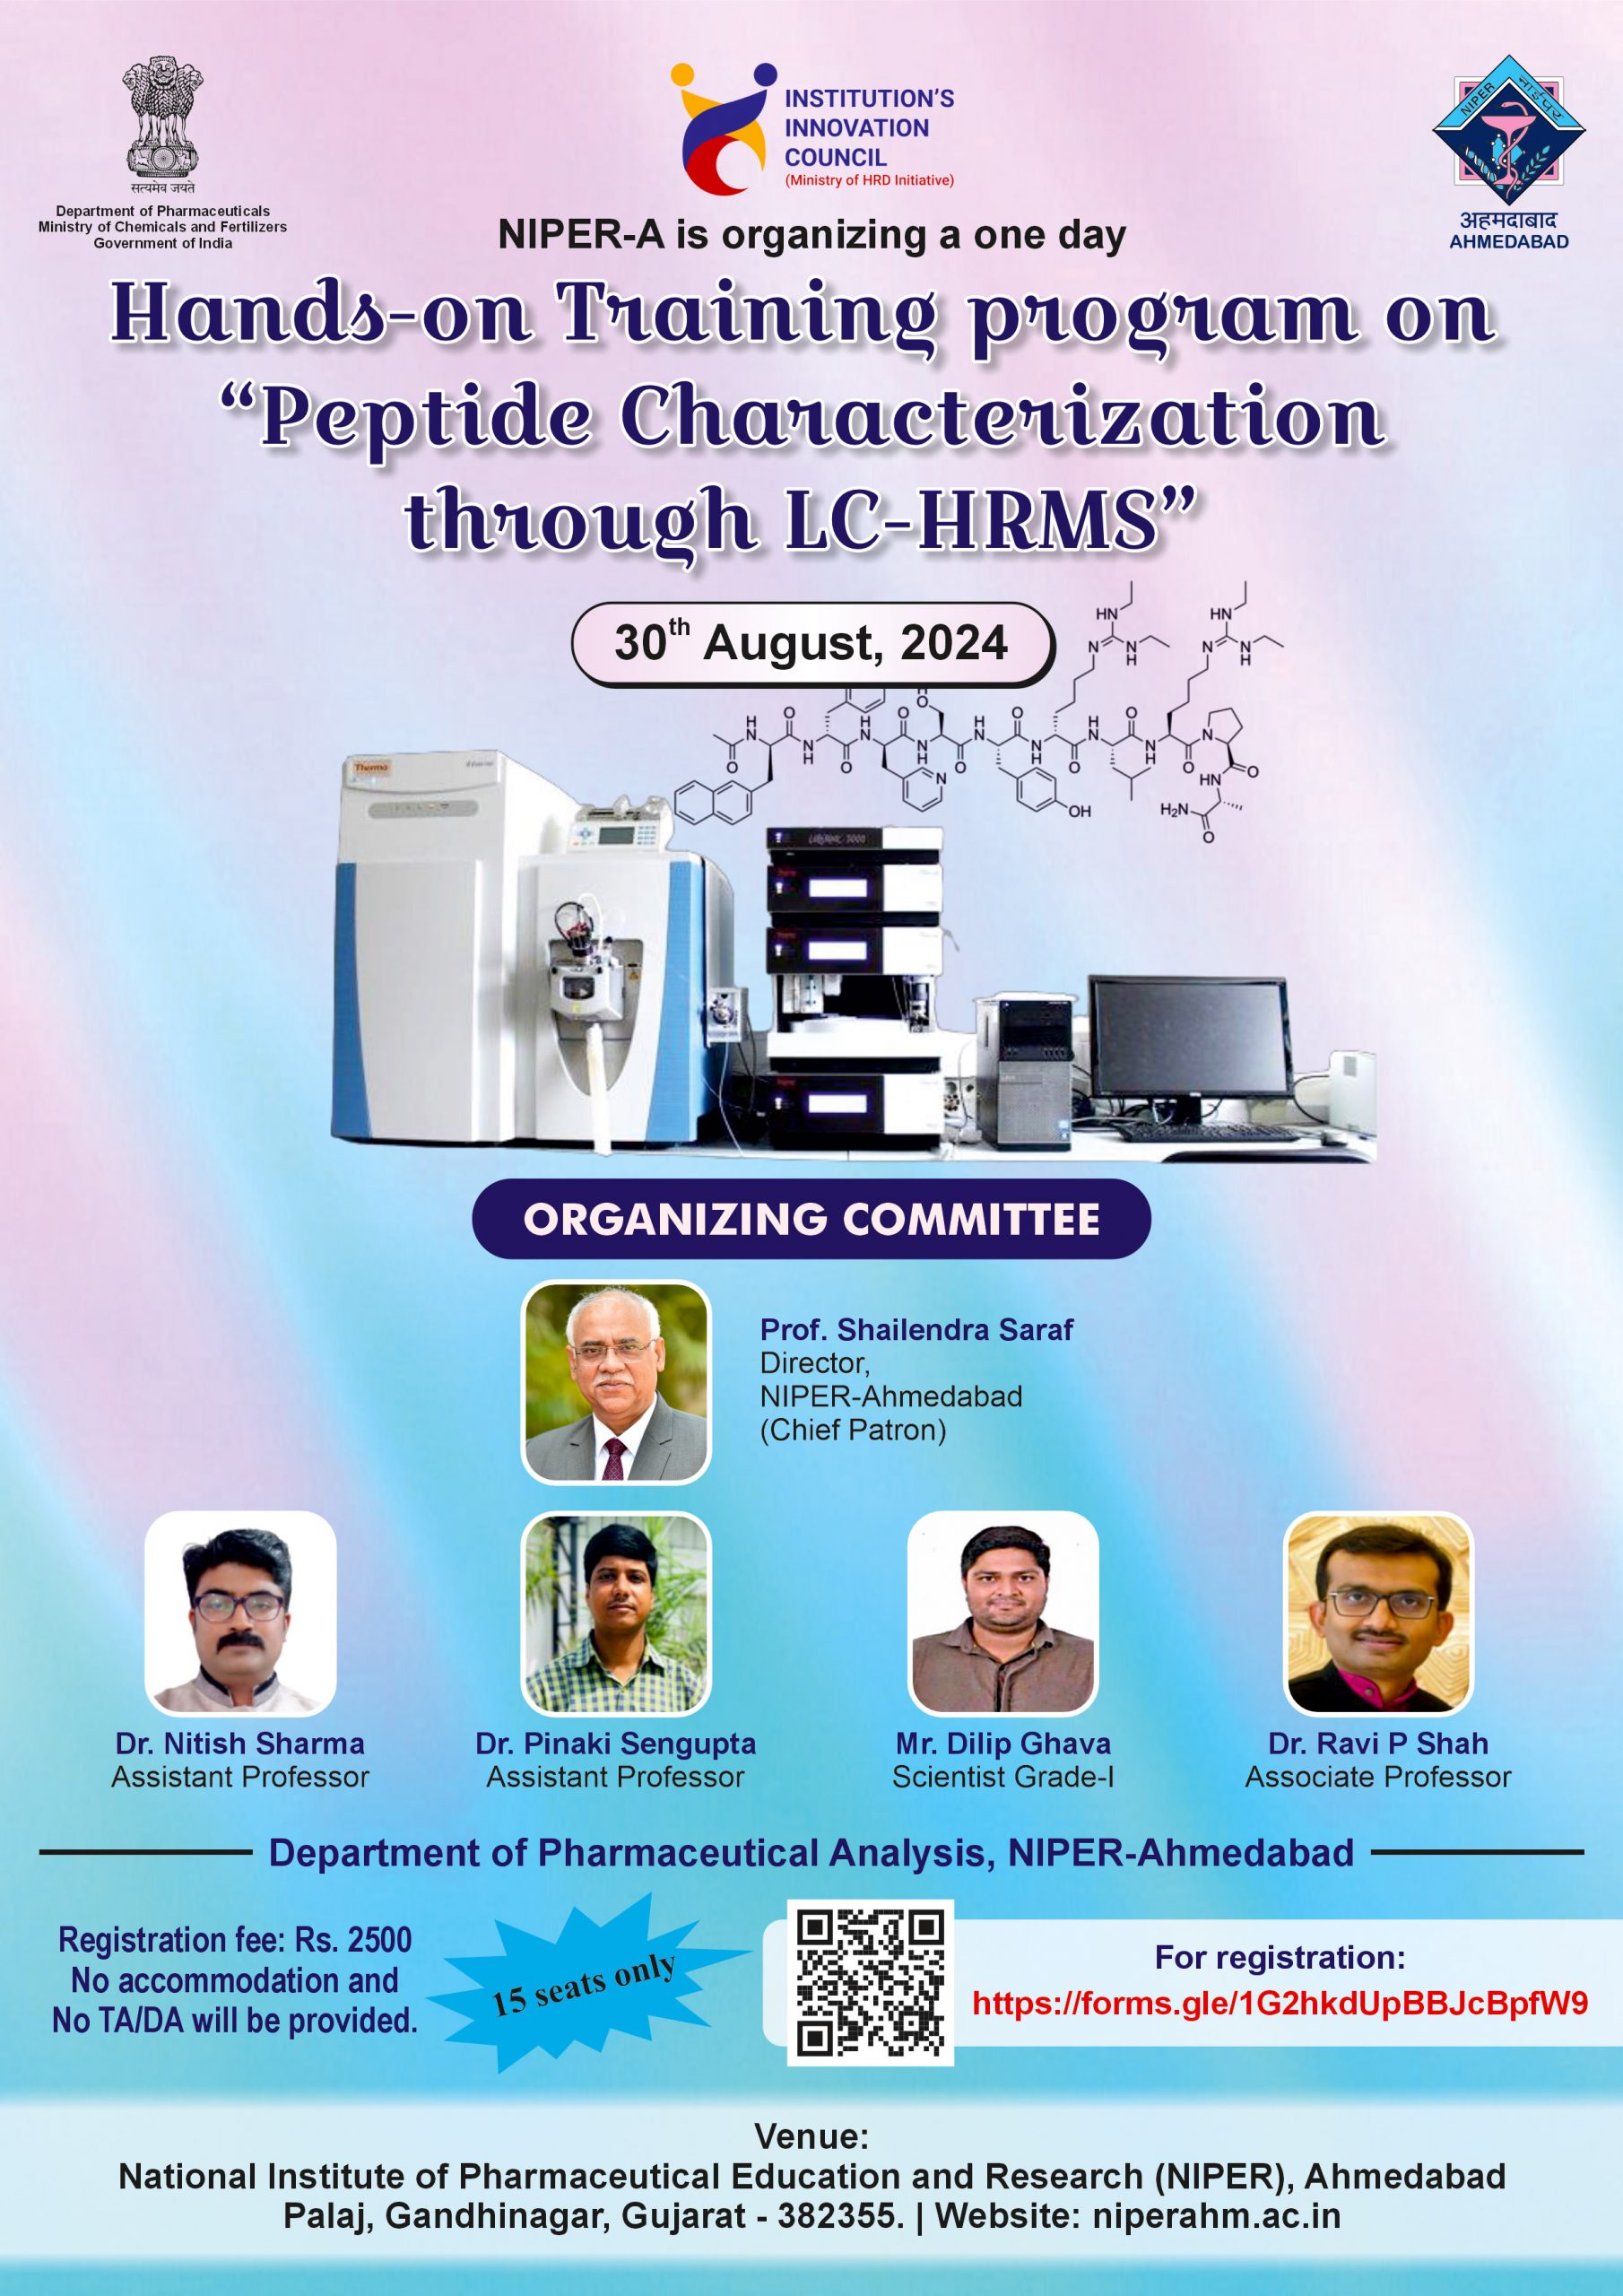 Hands-on training on “ Peptide Characterization through LC-HRMS